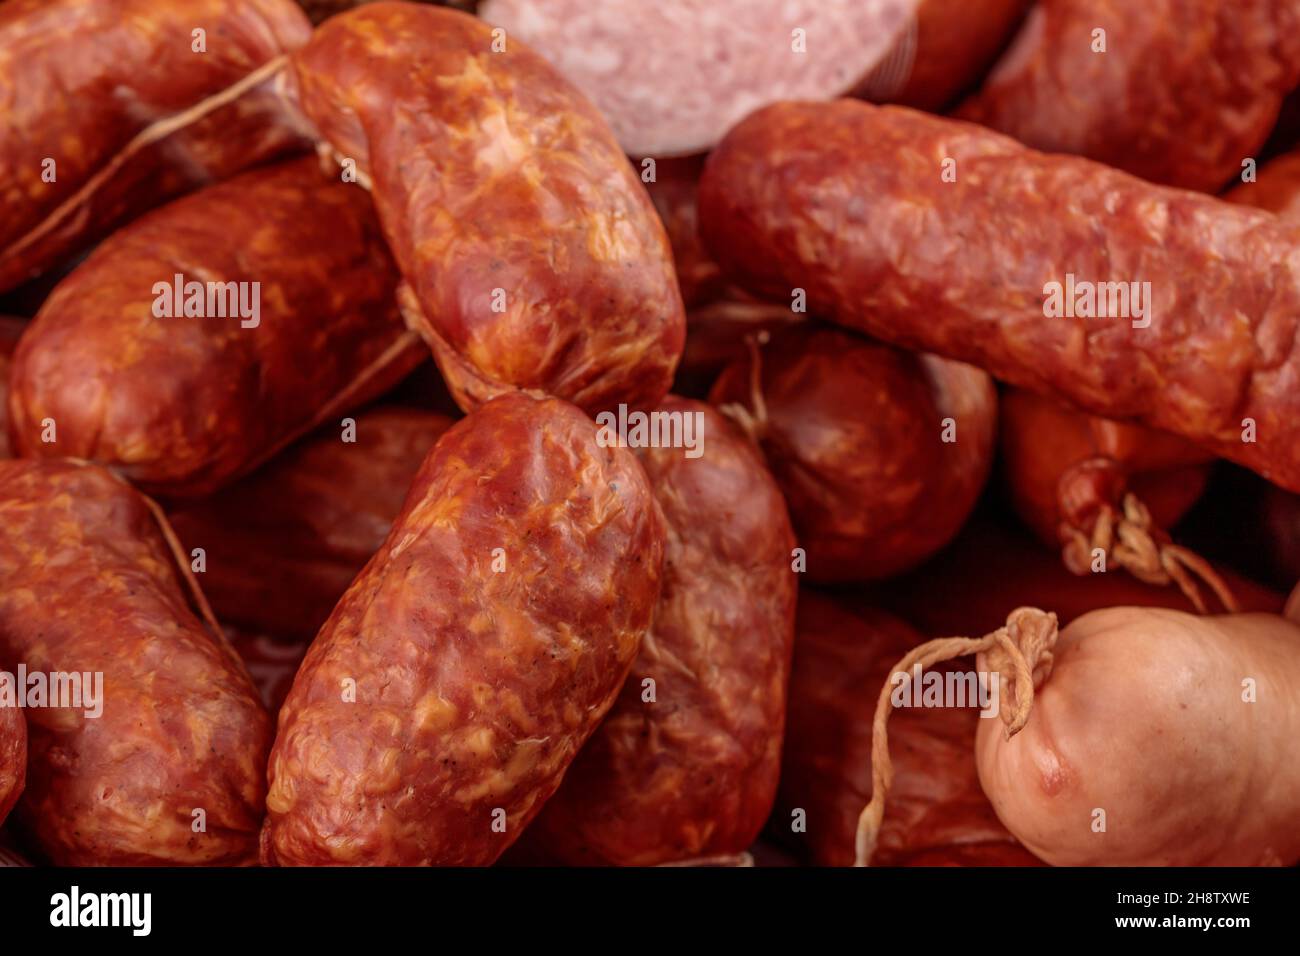 Smoked pork sausages made from minced meat Stock Photo